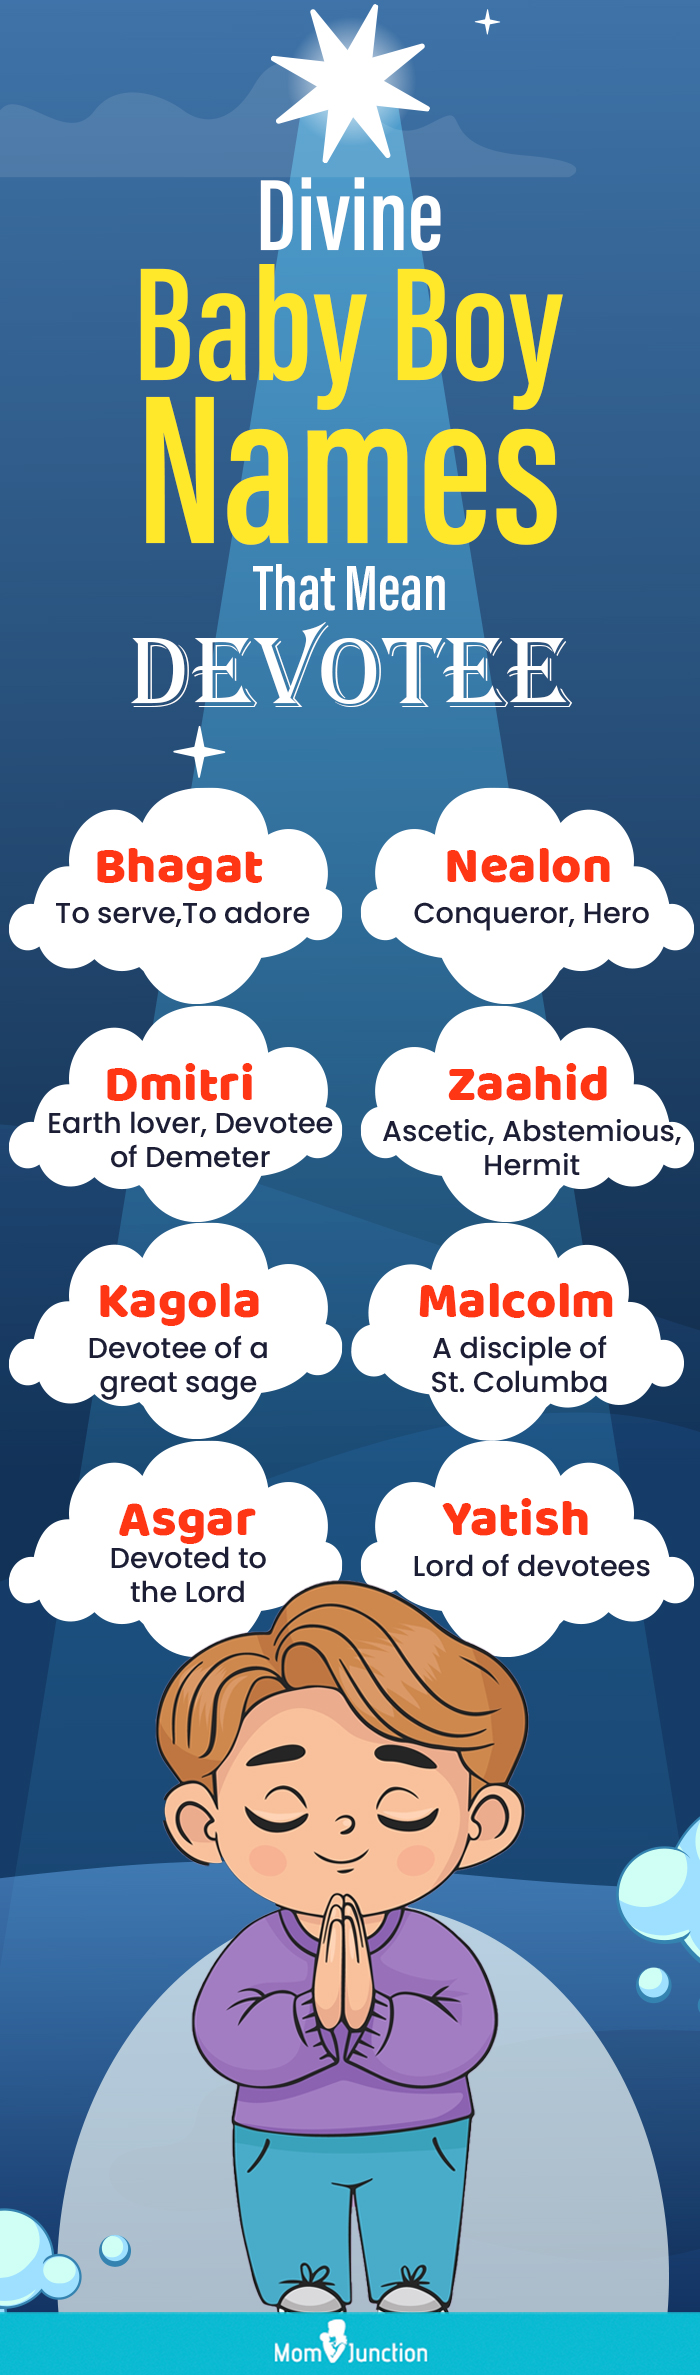 Divine Baby Boy Names That Mean Devotee (infographic)